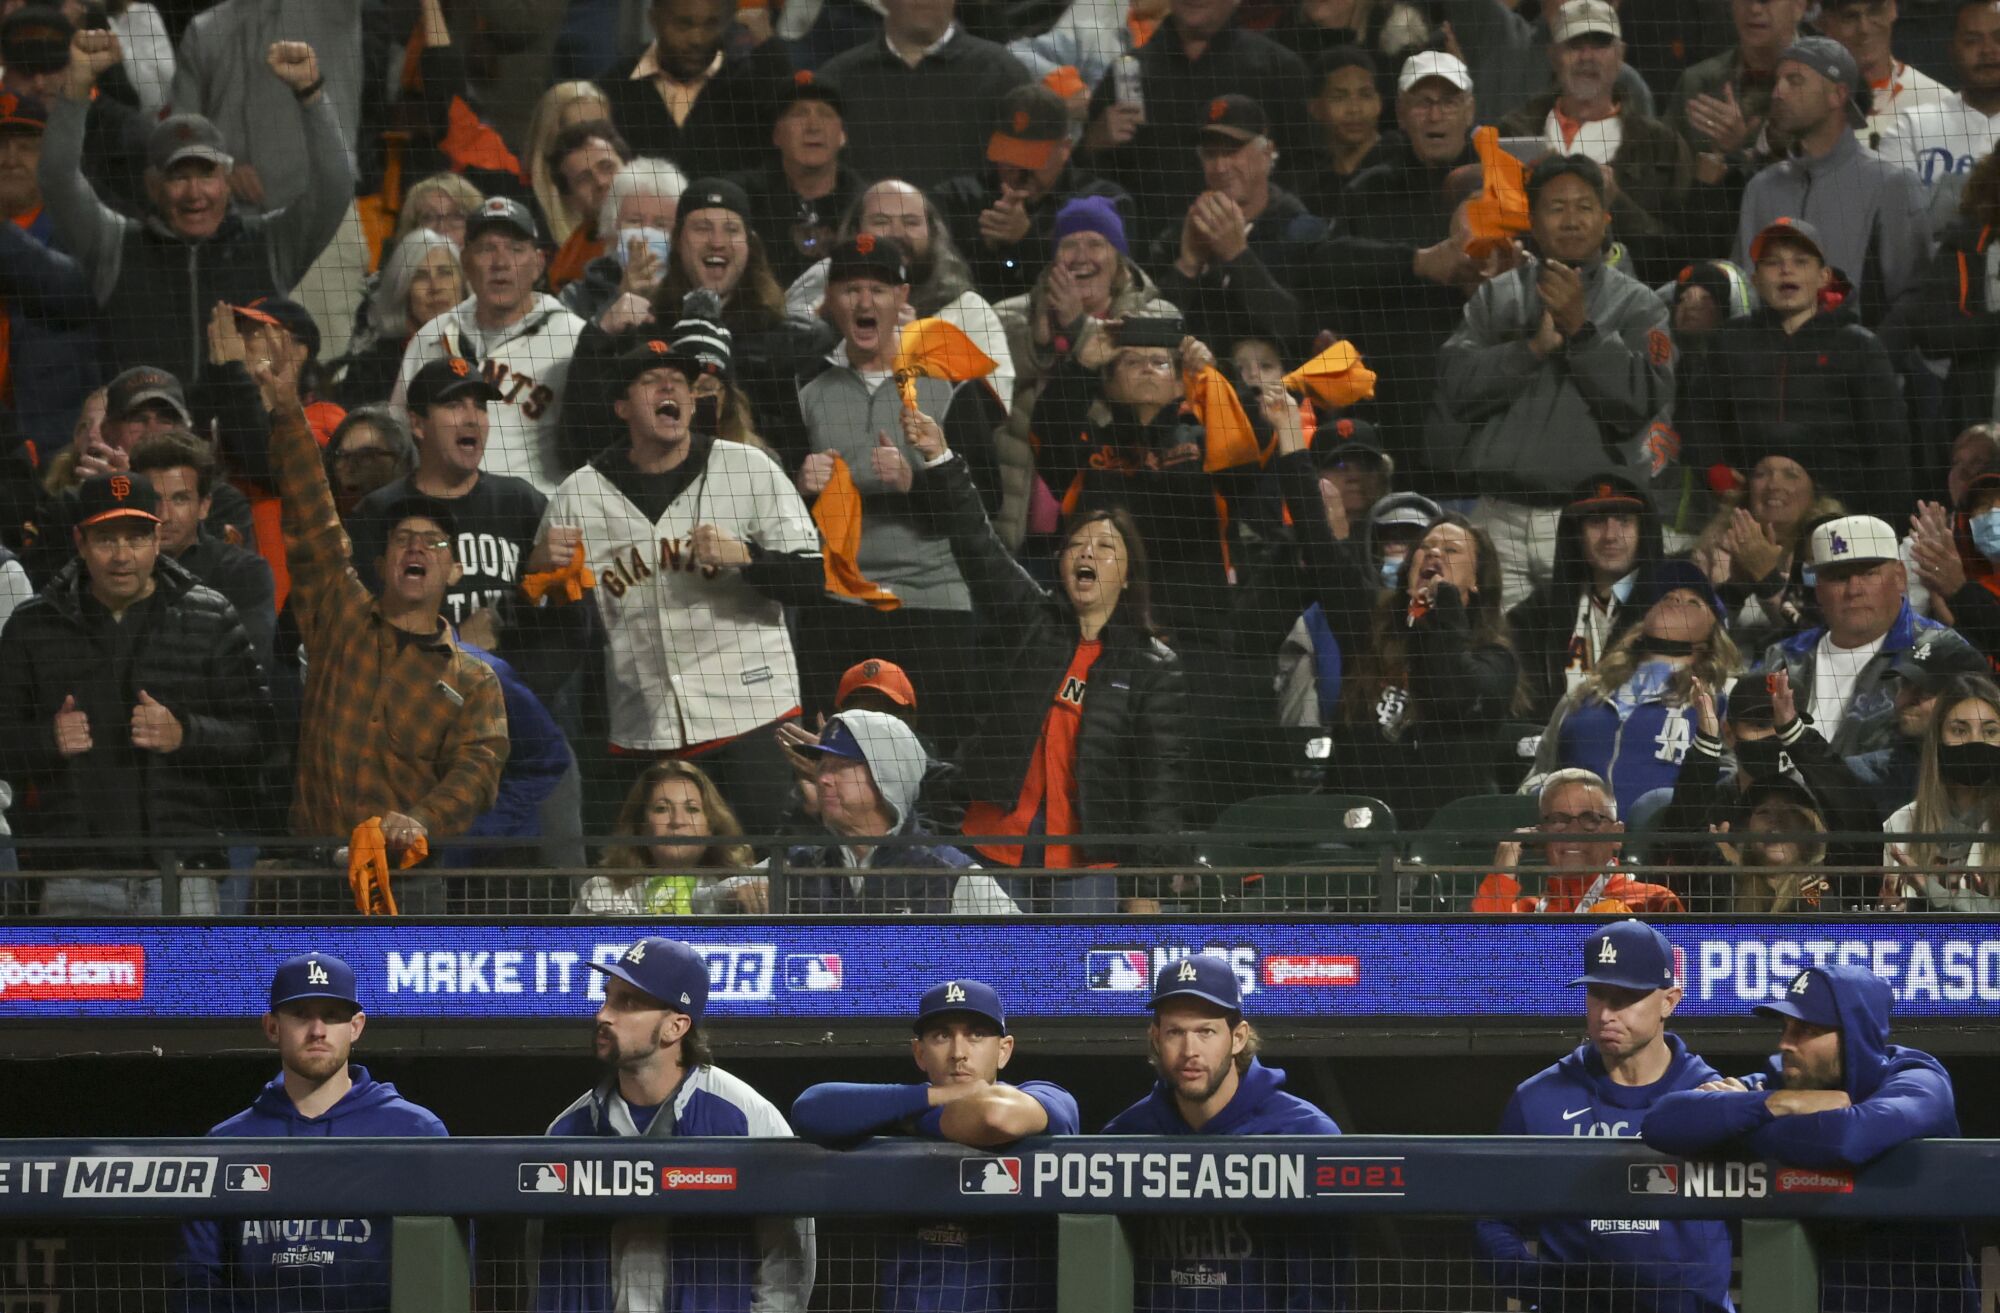 San Francisco Giants fans cheer behind the Los Angeles Dodgers bench after a strikeout by AJ Pollock